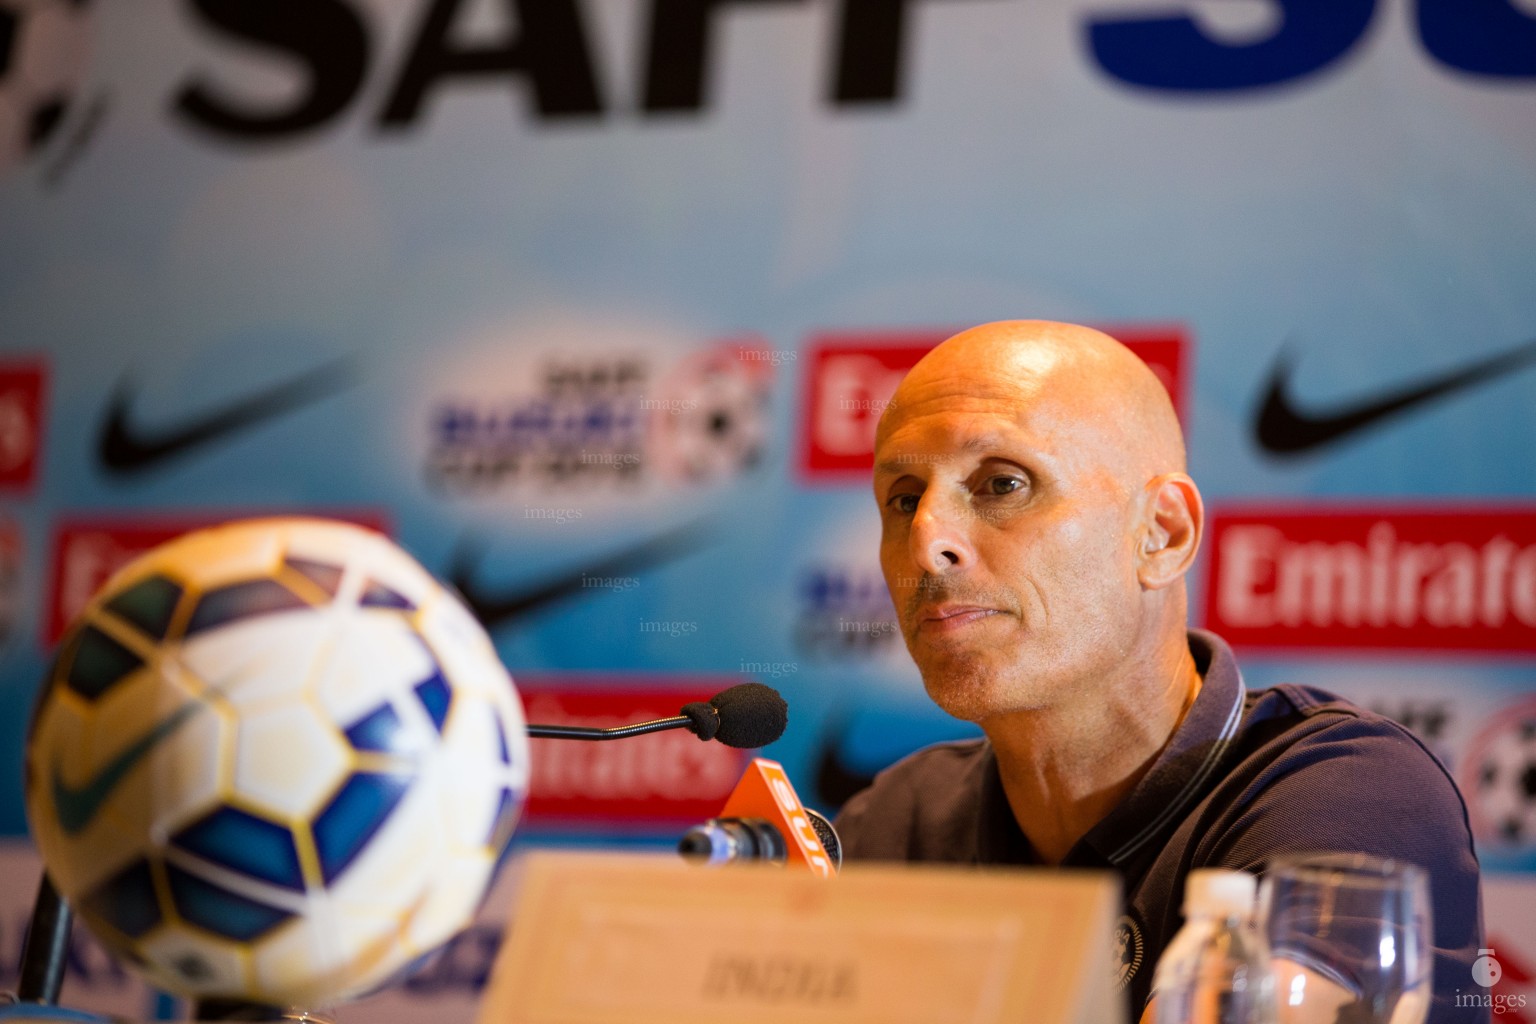 Indian coach speaks to the media ahead of the semifinals in Thiruvananthapuram, India, Wednesday, December. 30, 2015.  (Images.mv Photo/ Mohamed Ahsan).